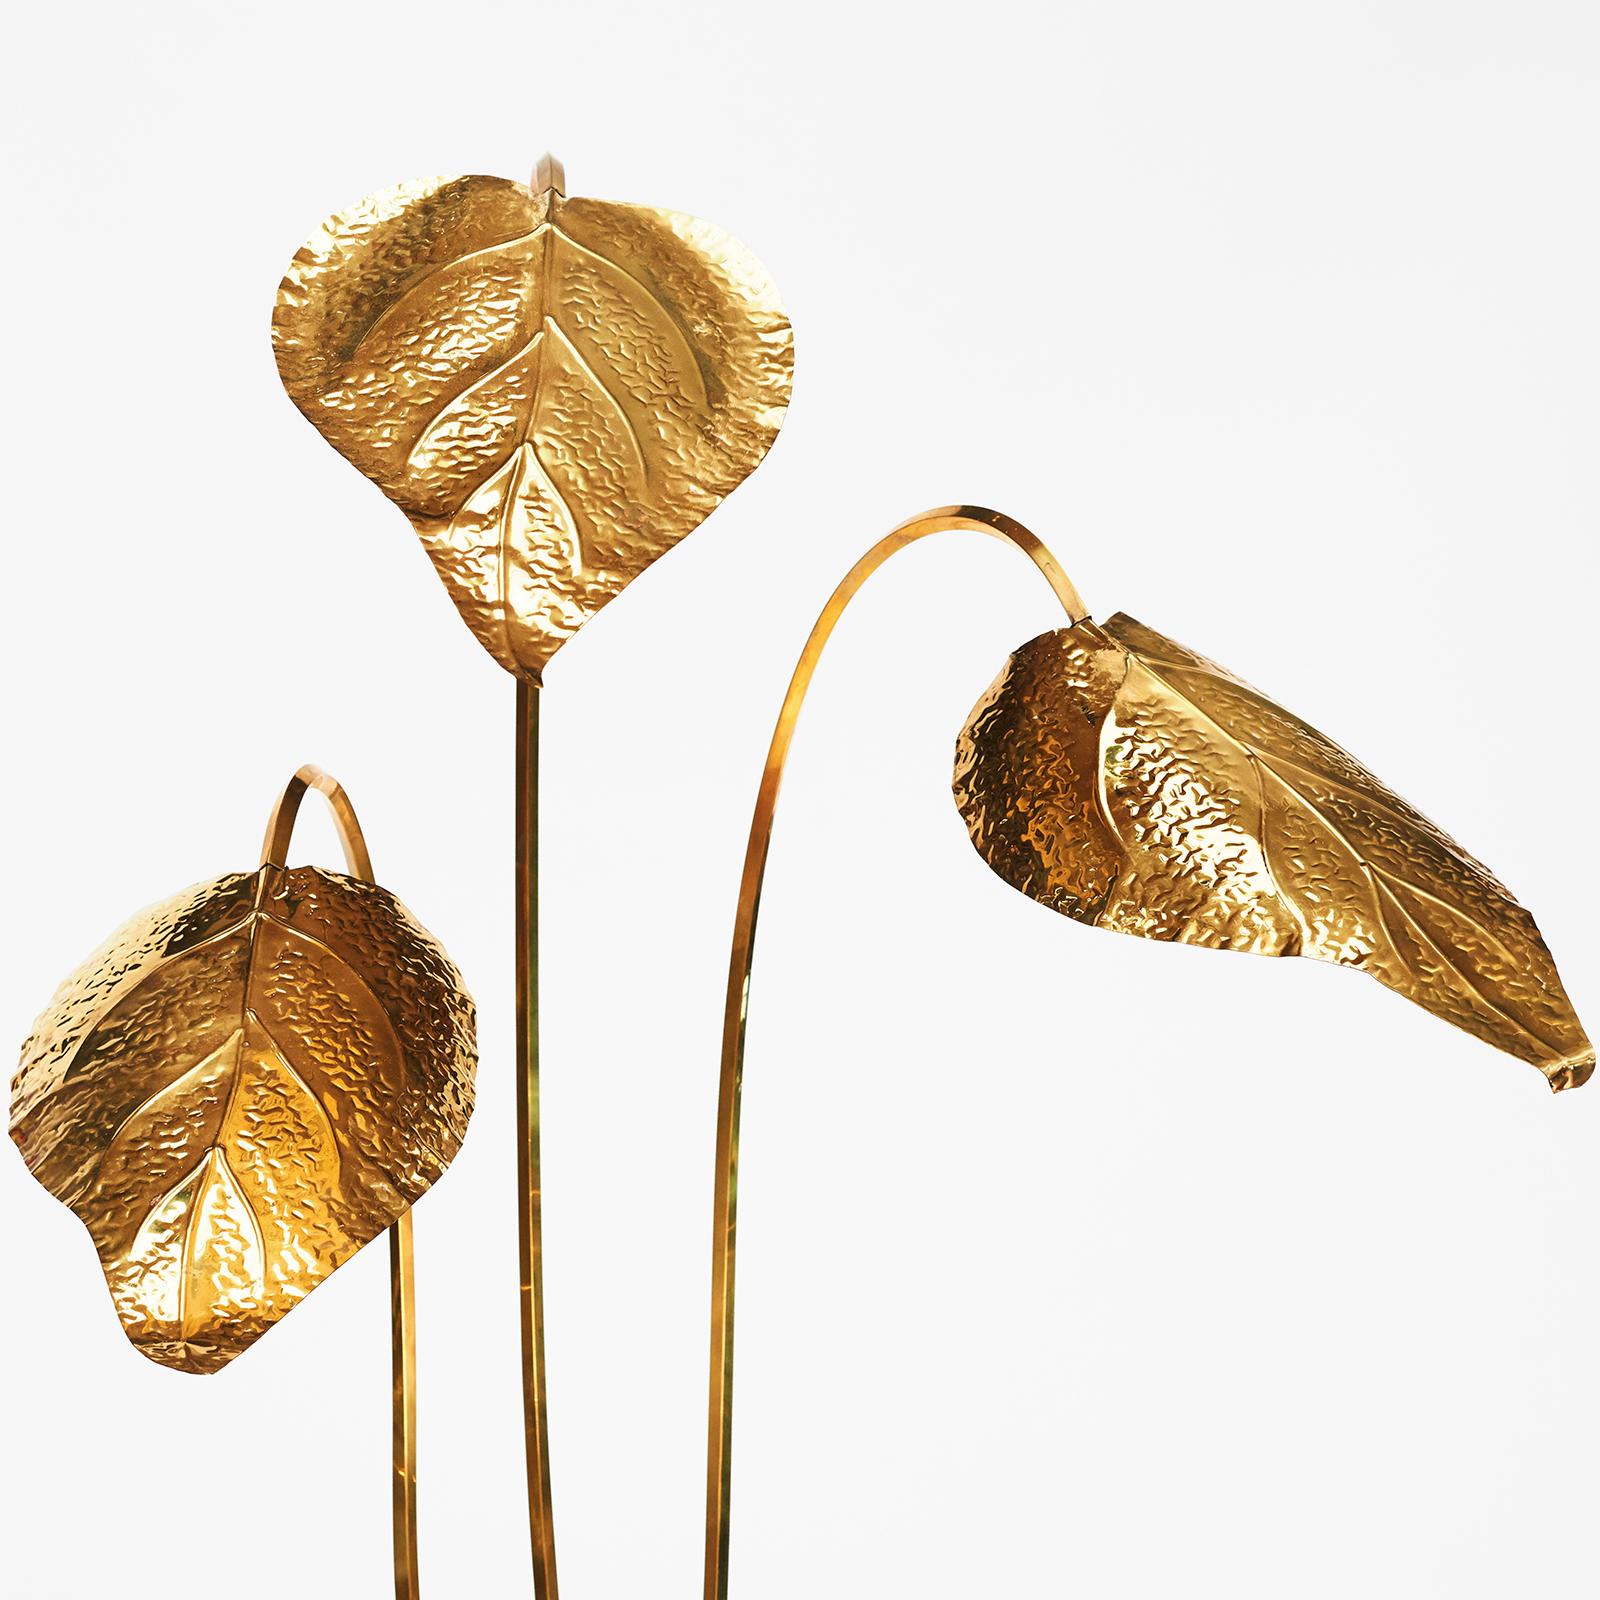 Large (87 cm high) decorative table lamp in the form of palm leaves. Made in brass. France, 1960-1969.